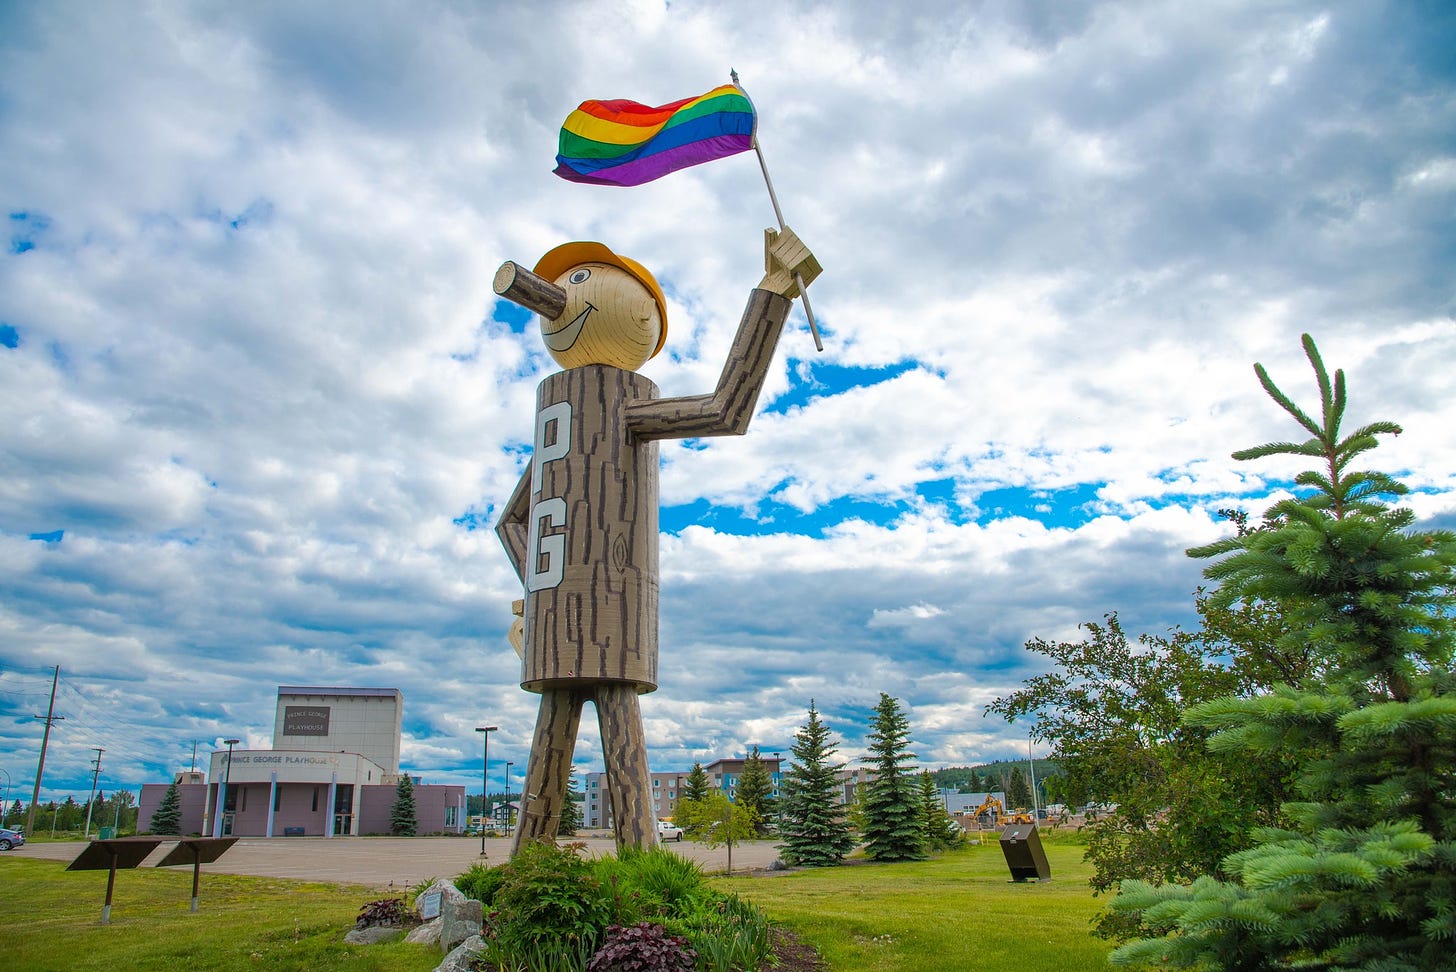 Mr. PG holding a pride flag on a cloudy summer afternoon